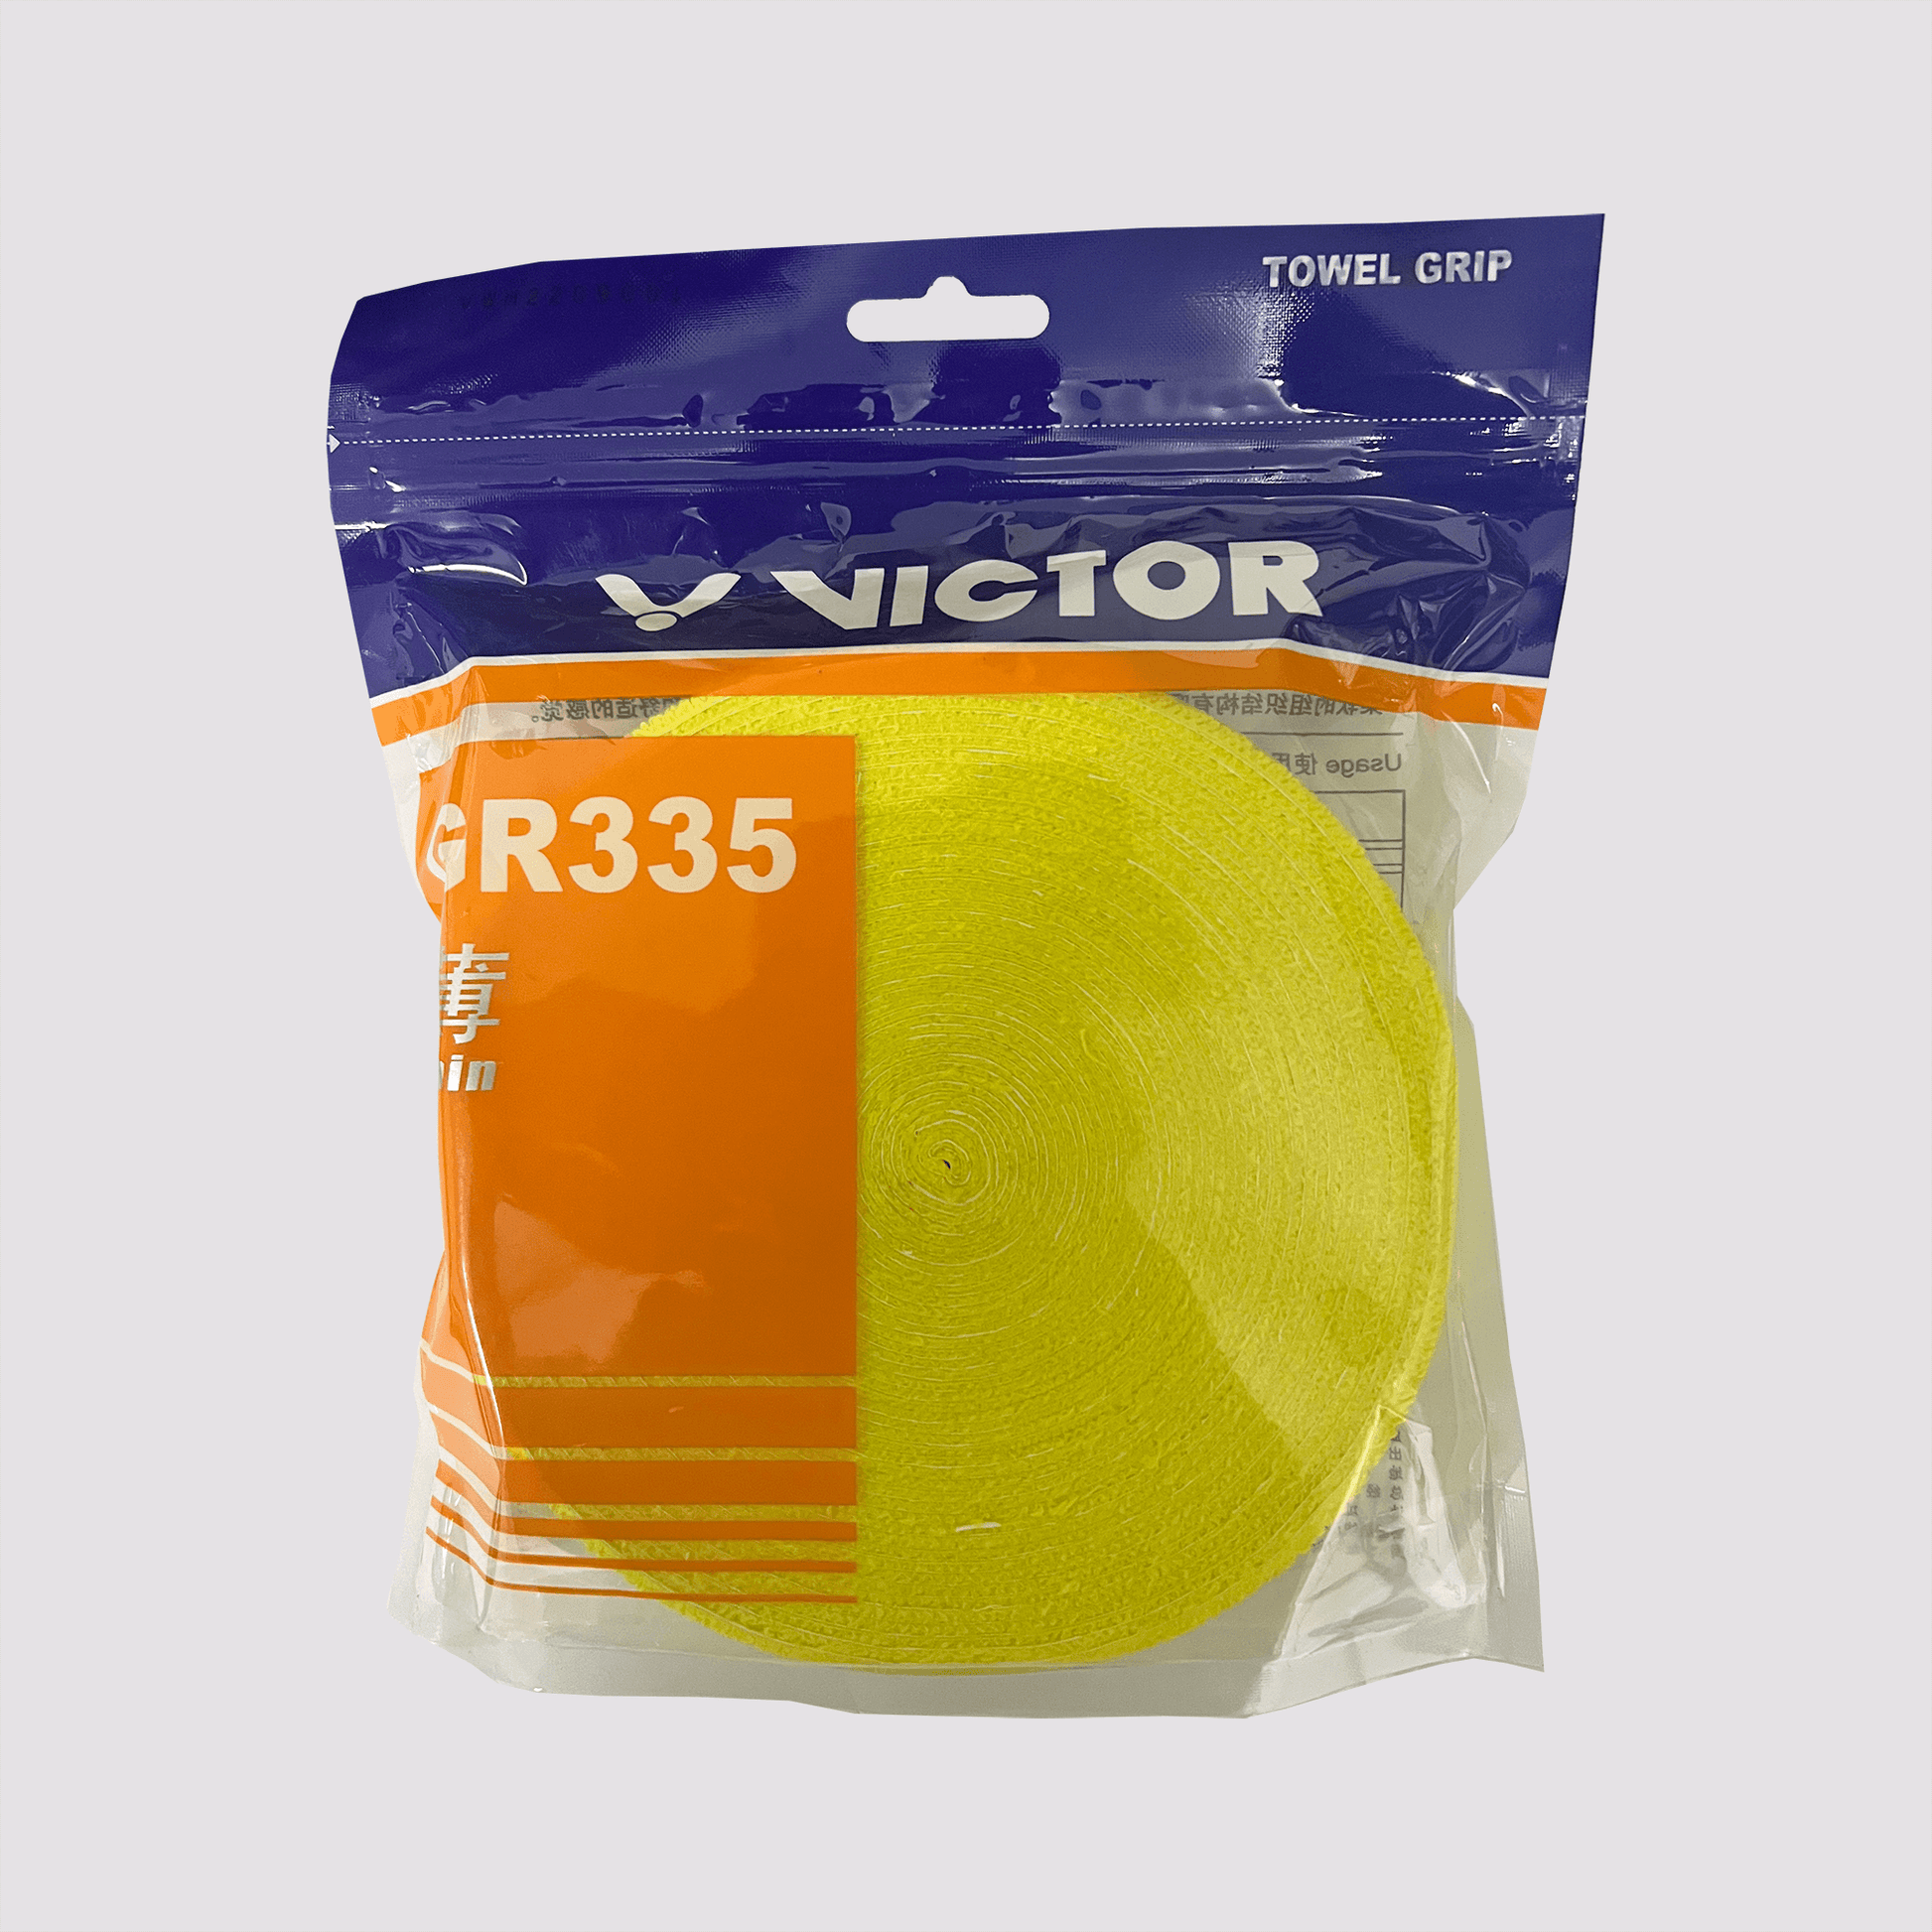 Victor GR335 Thin Tower Grip Roll